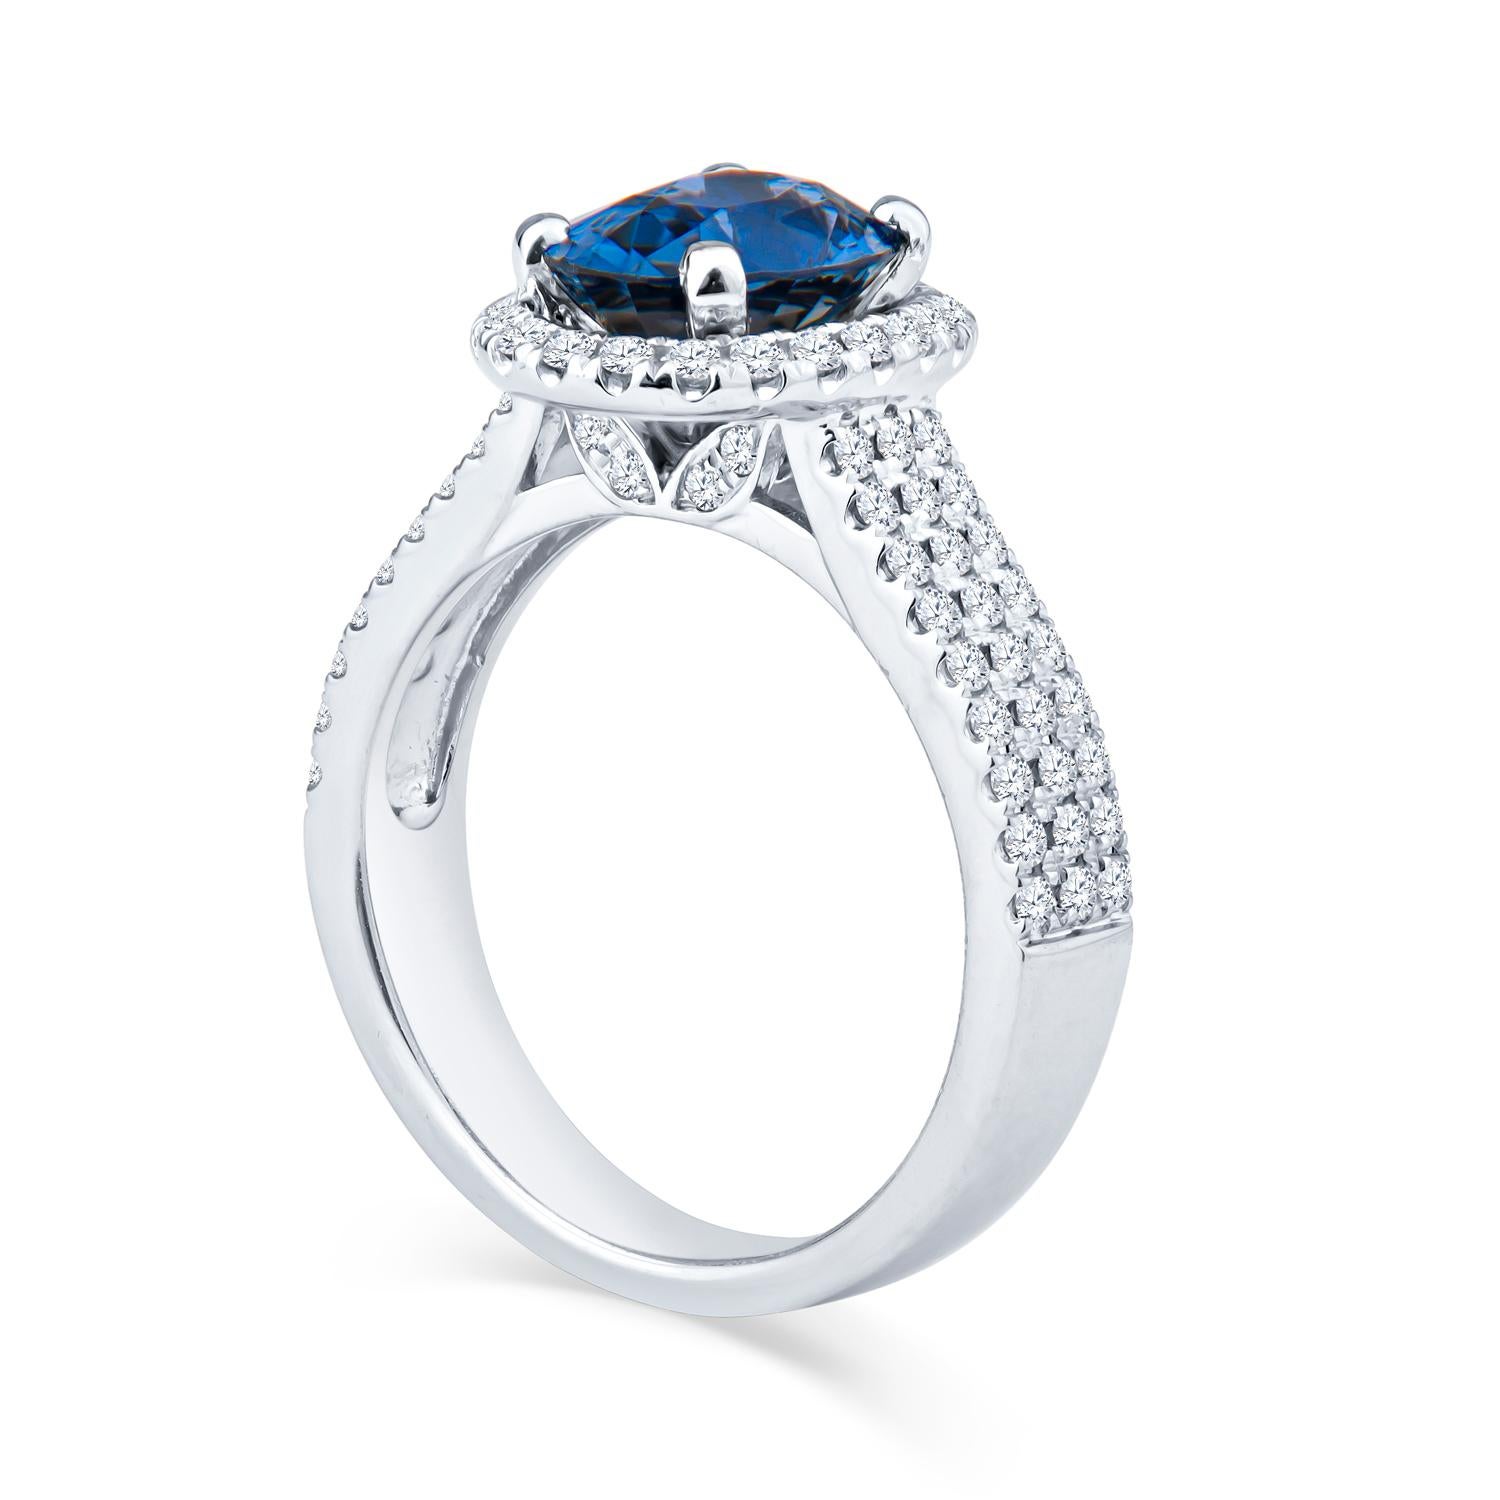 Oval Cut 2.28 Carat Oval Blue Sapphire and Diamond Ring, GIA Certified